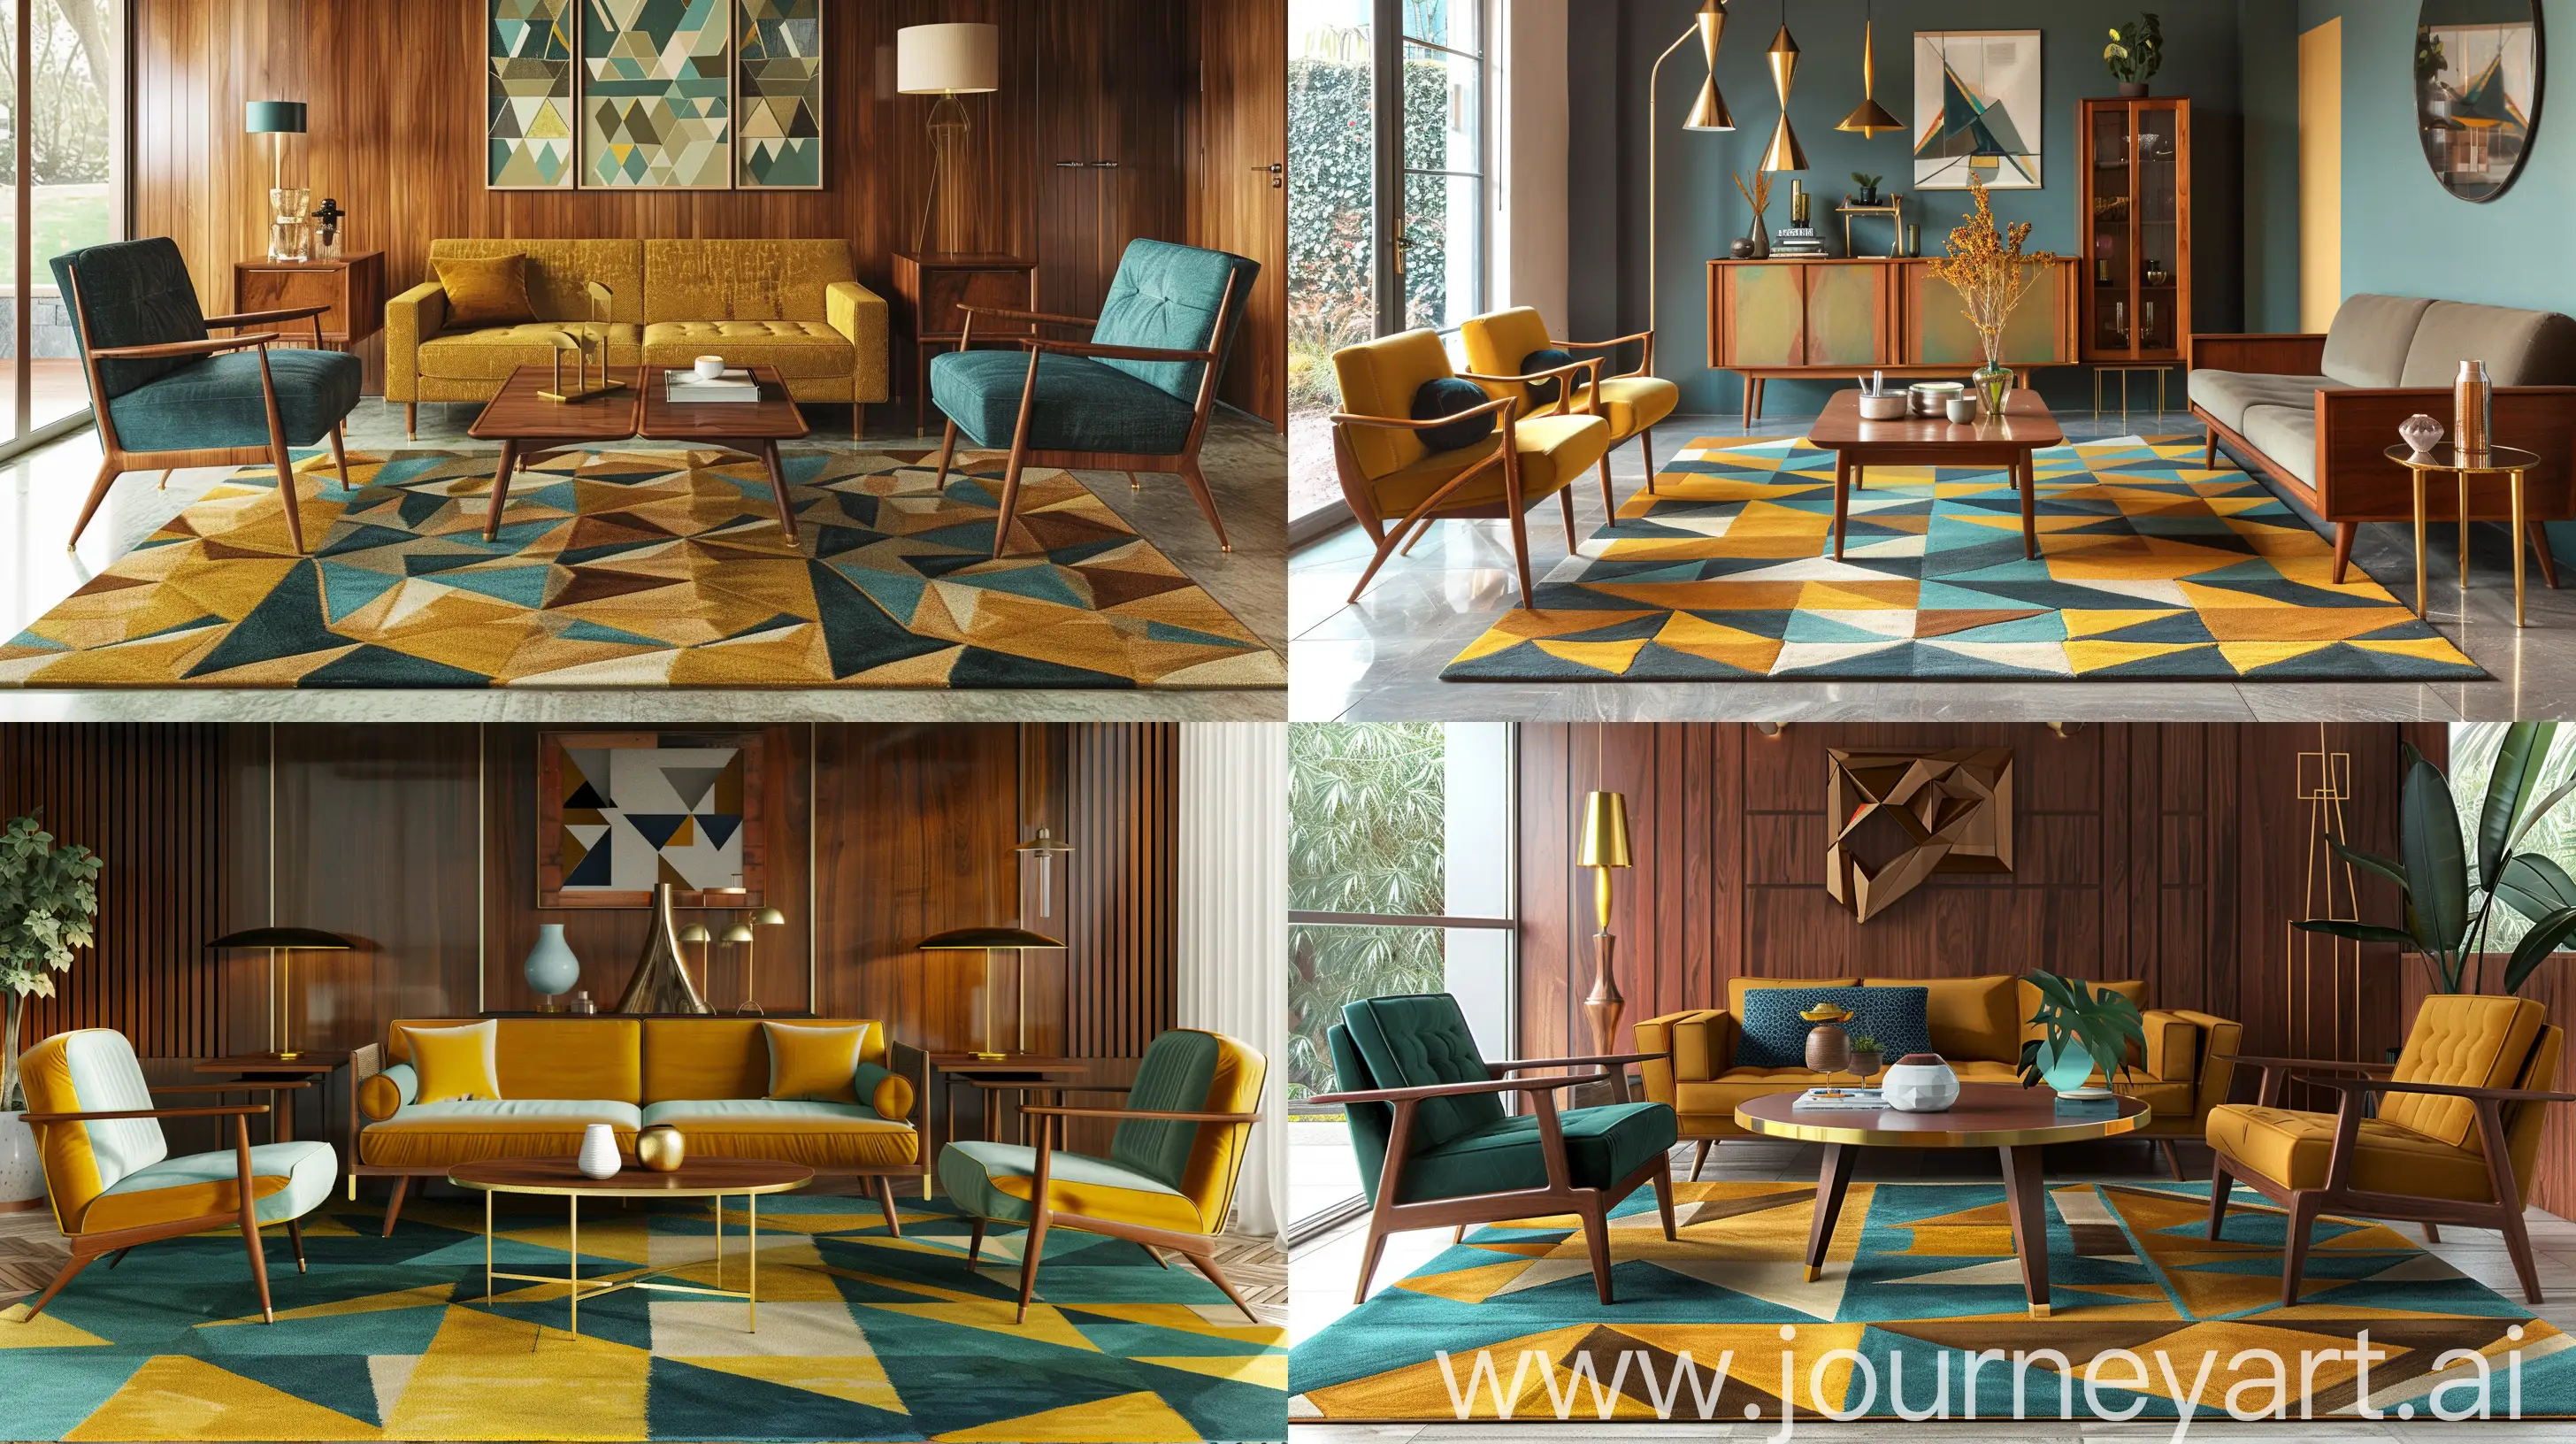 Journey into a mid-century modern living room, where retro vibes meet contemporary elegance. Picture a bold geometric rug in shades of mustard and teal, paired with sleek furniture in warm walnut wood and brass accents. --ar 16:9